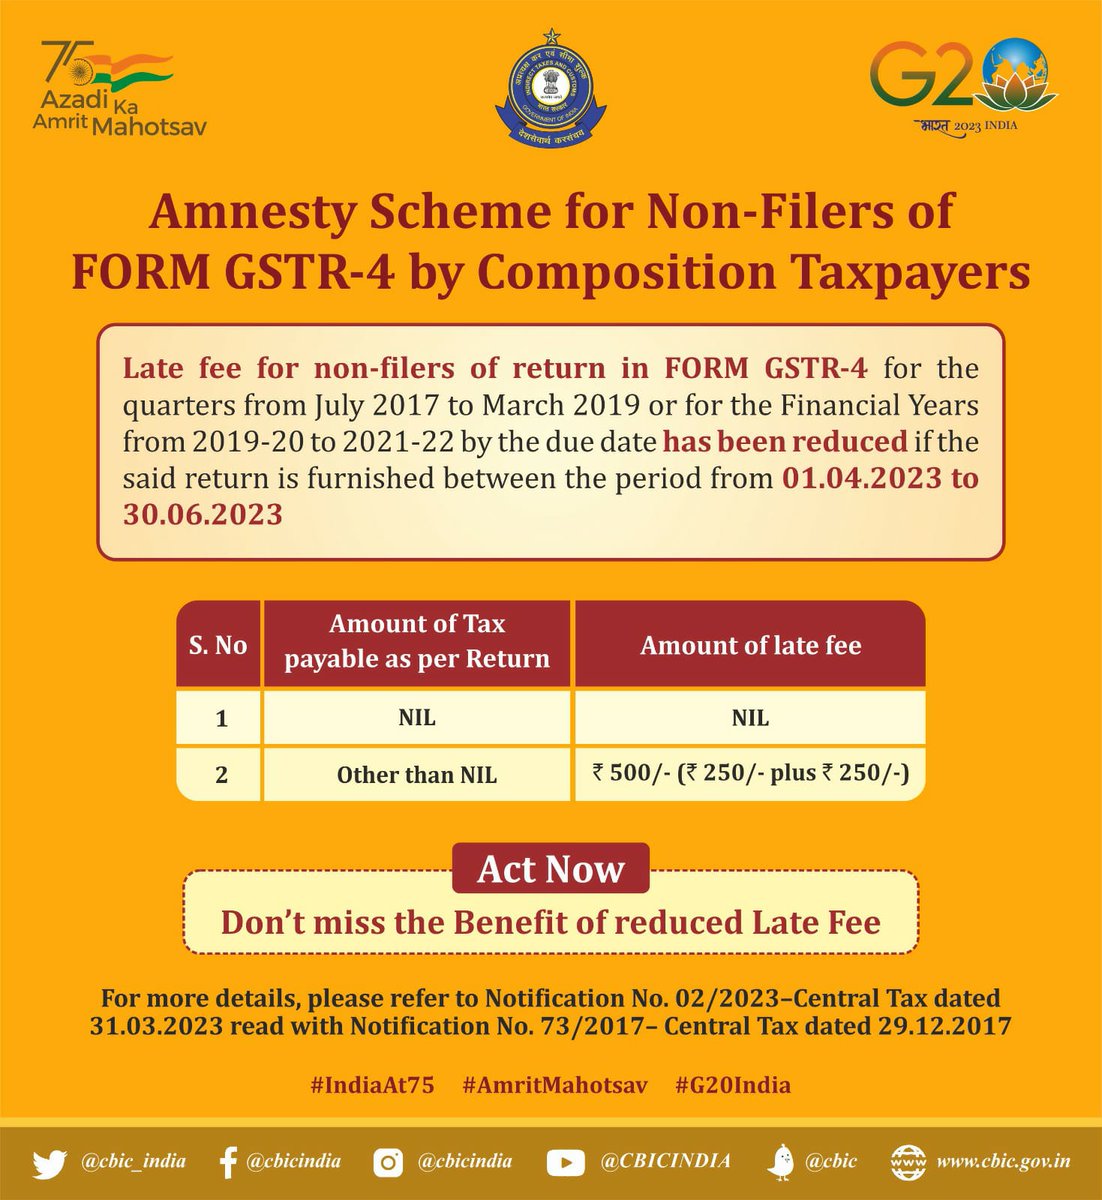 Amnesty scheme for Non-filers of Form GSTR 4 by composite Taxpayers 
#gst #gstupdates #gstr4